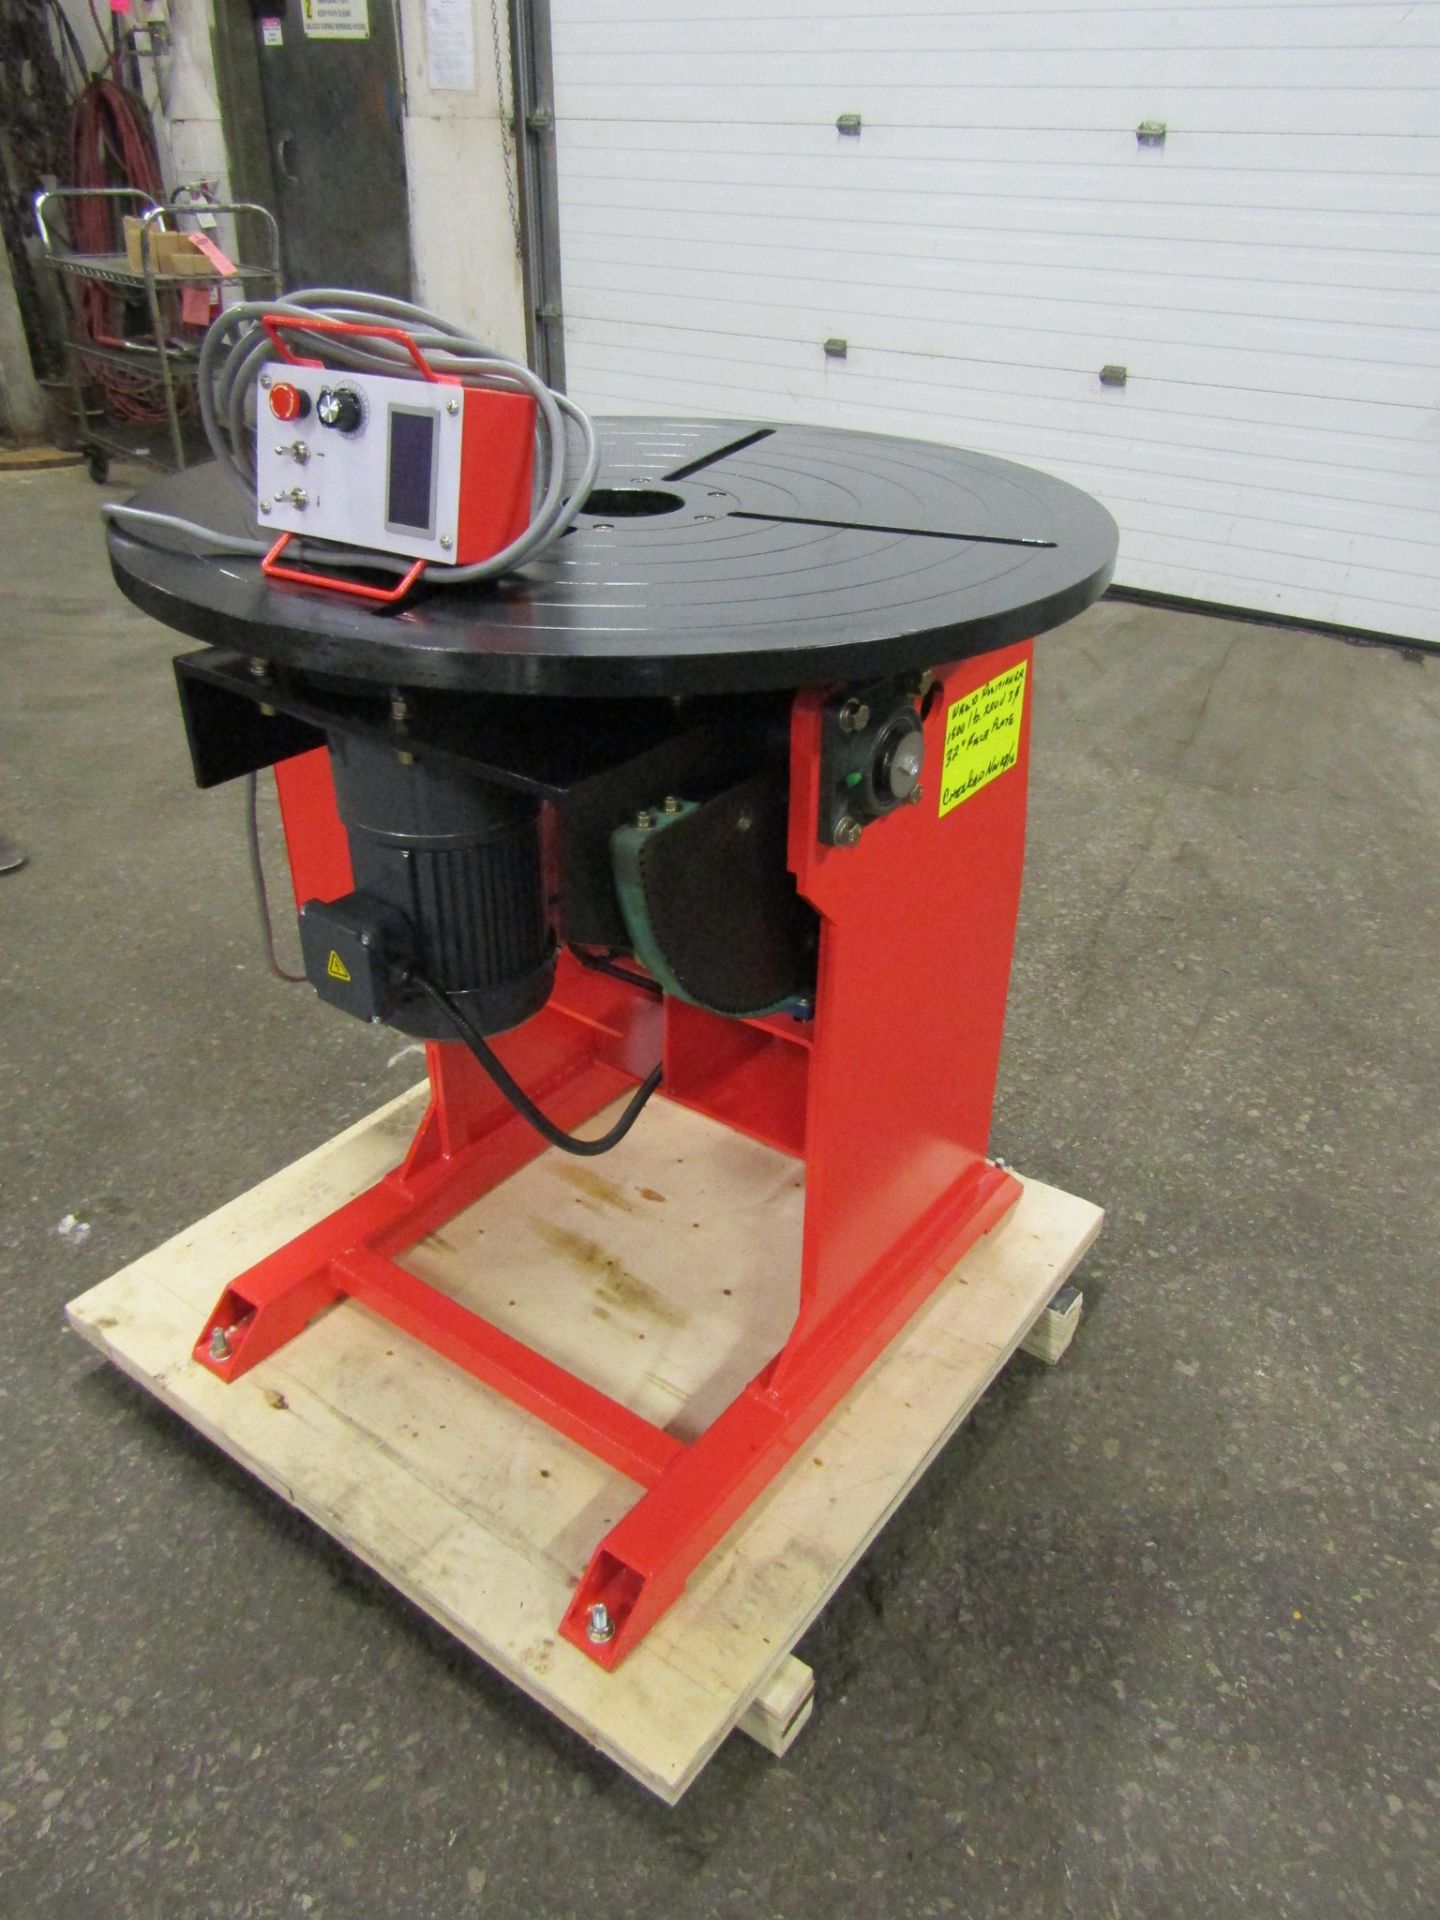 ***** Verner model VD-1500 WELDING POSITIONER 1500lbs capacity - tilt and rotate with variable speed